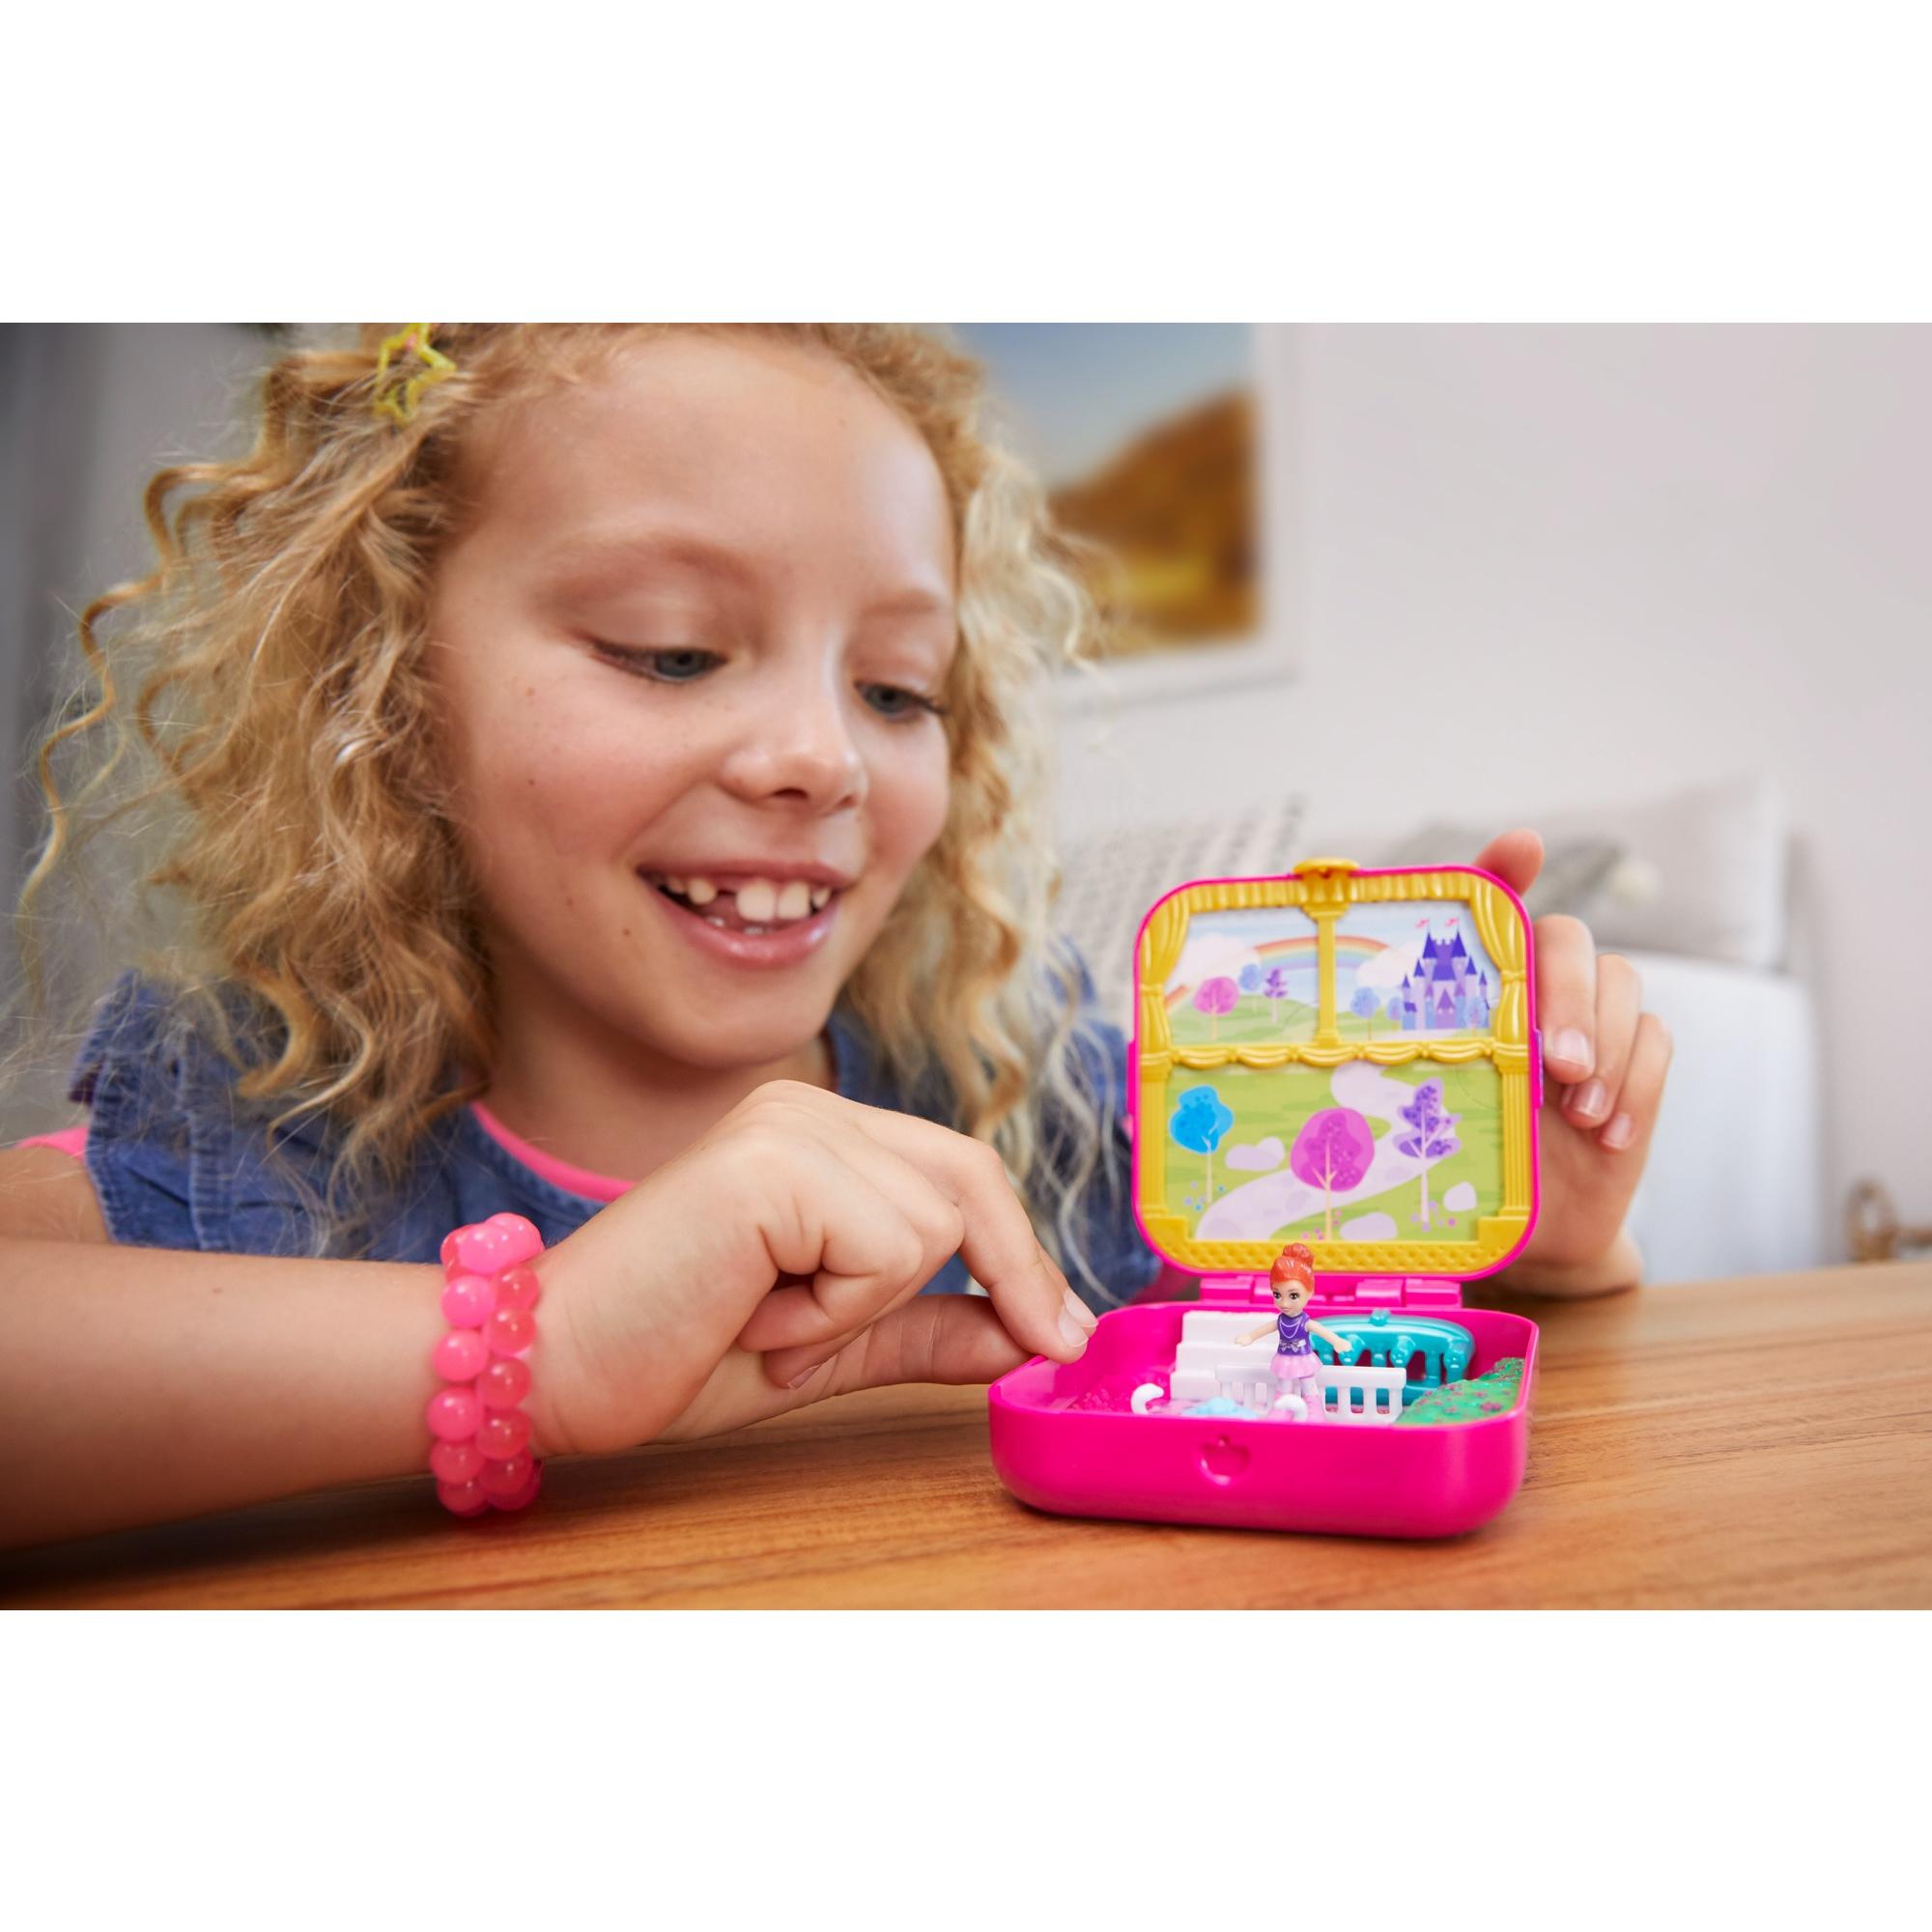 Polly Pocket Compacts w/ Dolls...